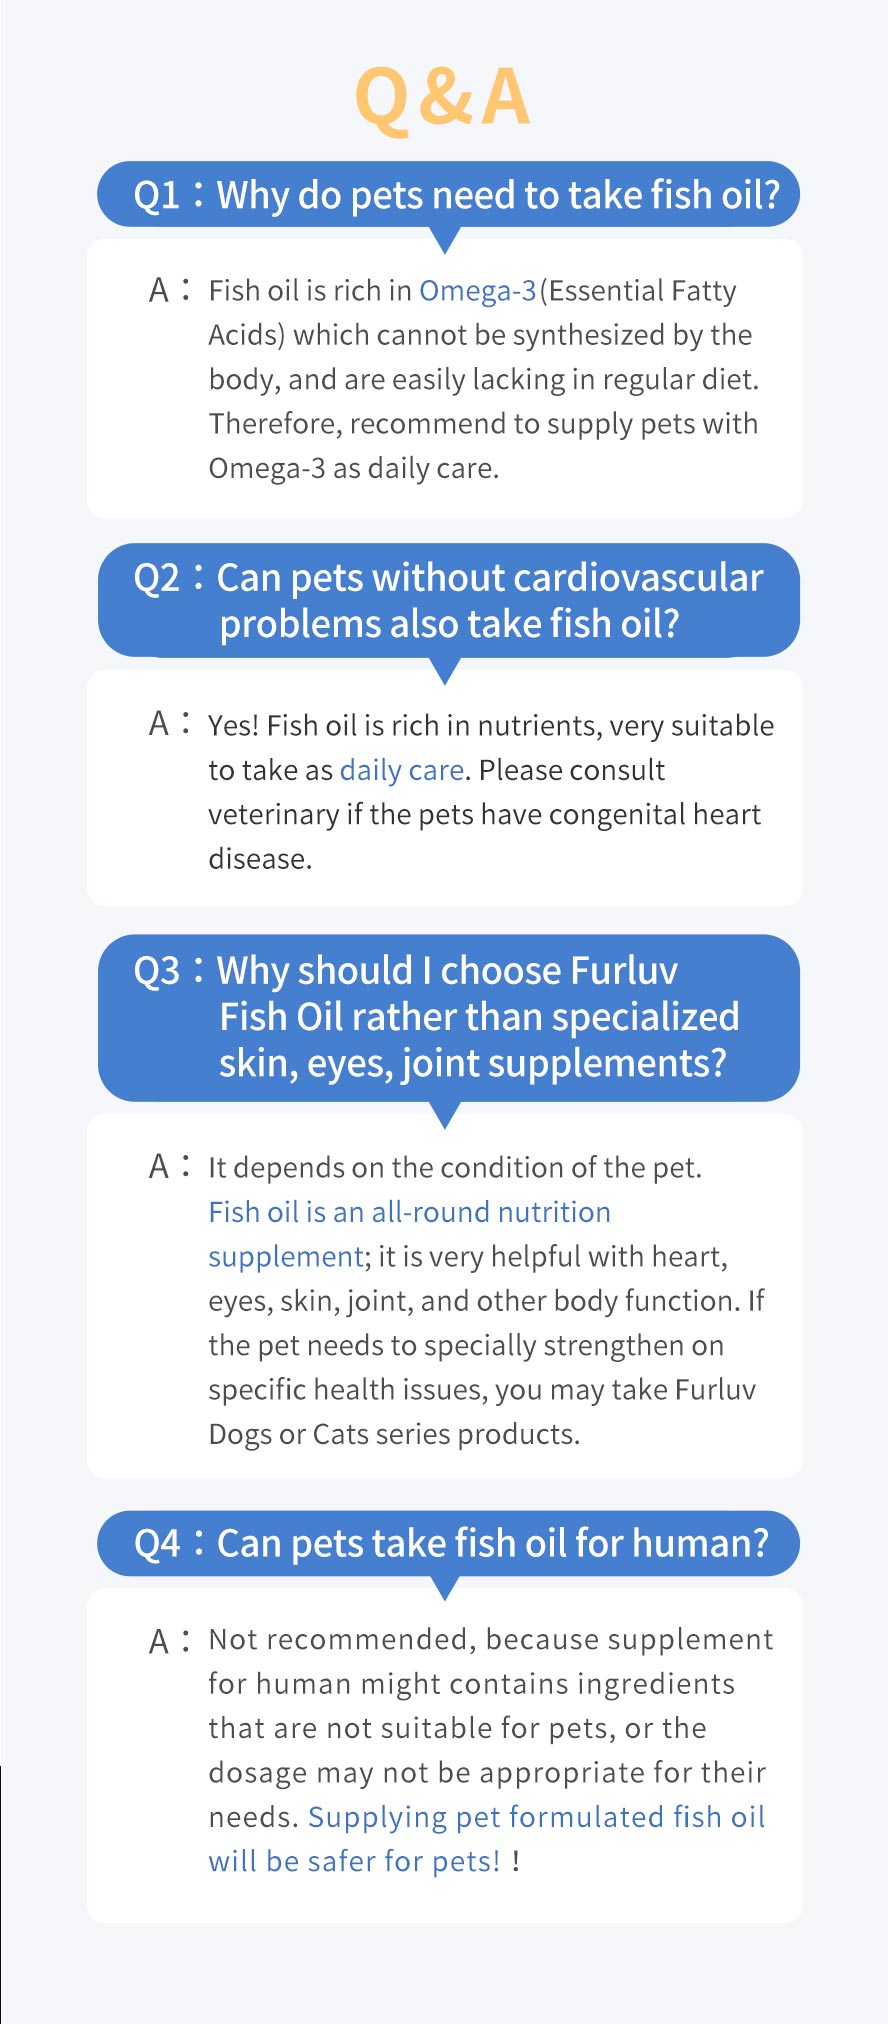 Human fish oil is not suitable for pets as the dosage and formulated nutritrion are different from pets needs